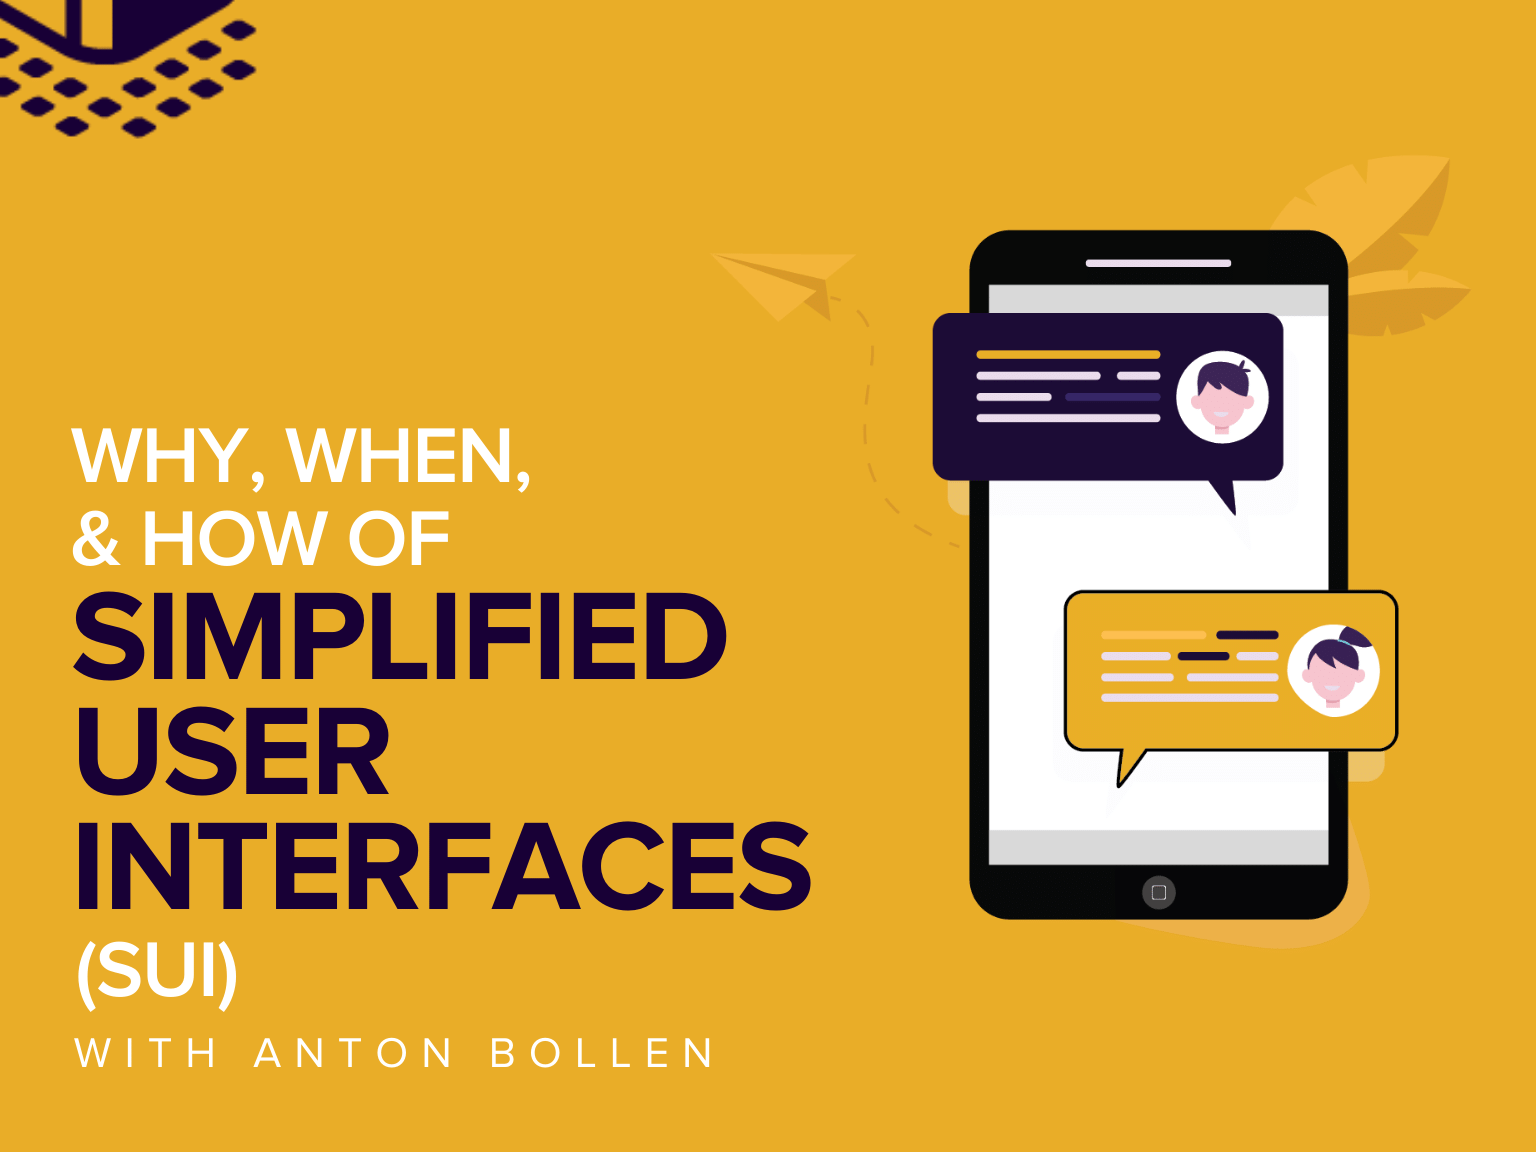 Why, When, & How of Simplified User Interfaces (SUI) with Anton Bollen